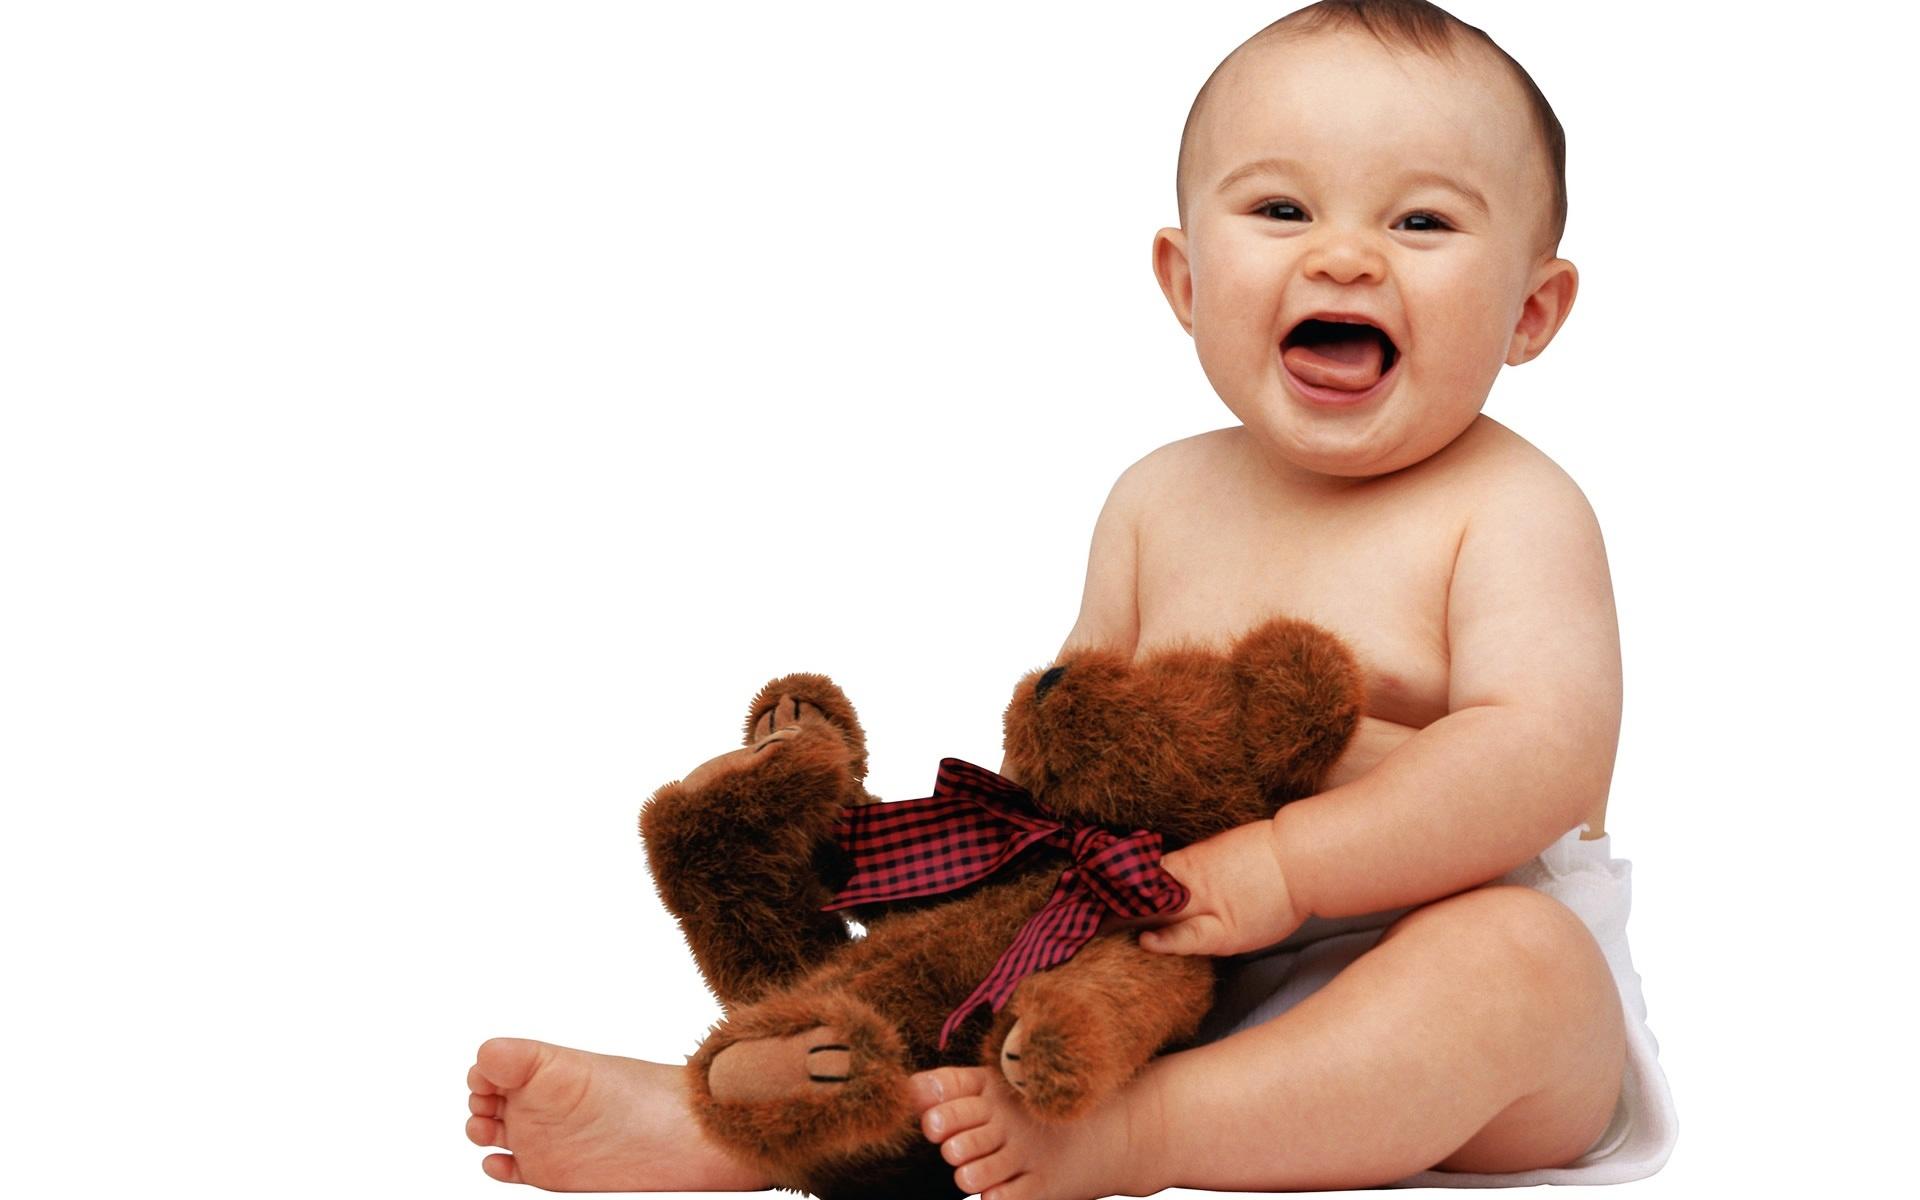 Cute Small Baby Wallpaper, image collections of wallpaper